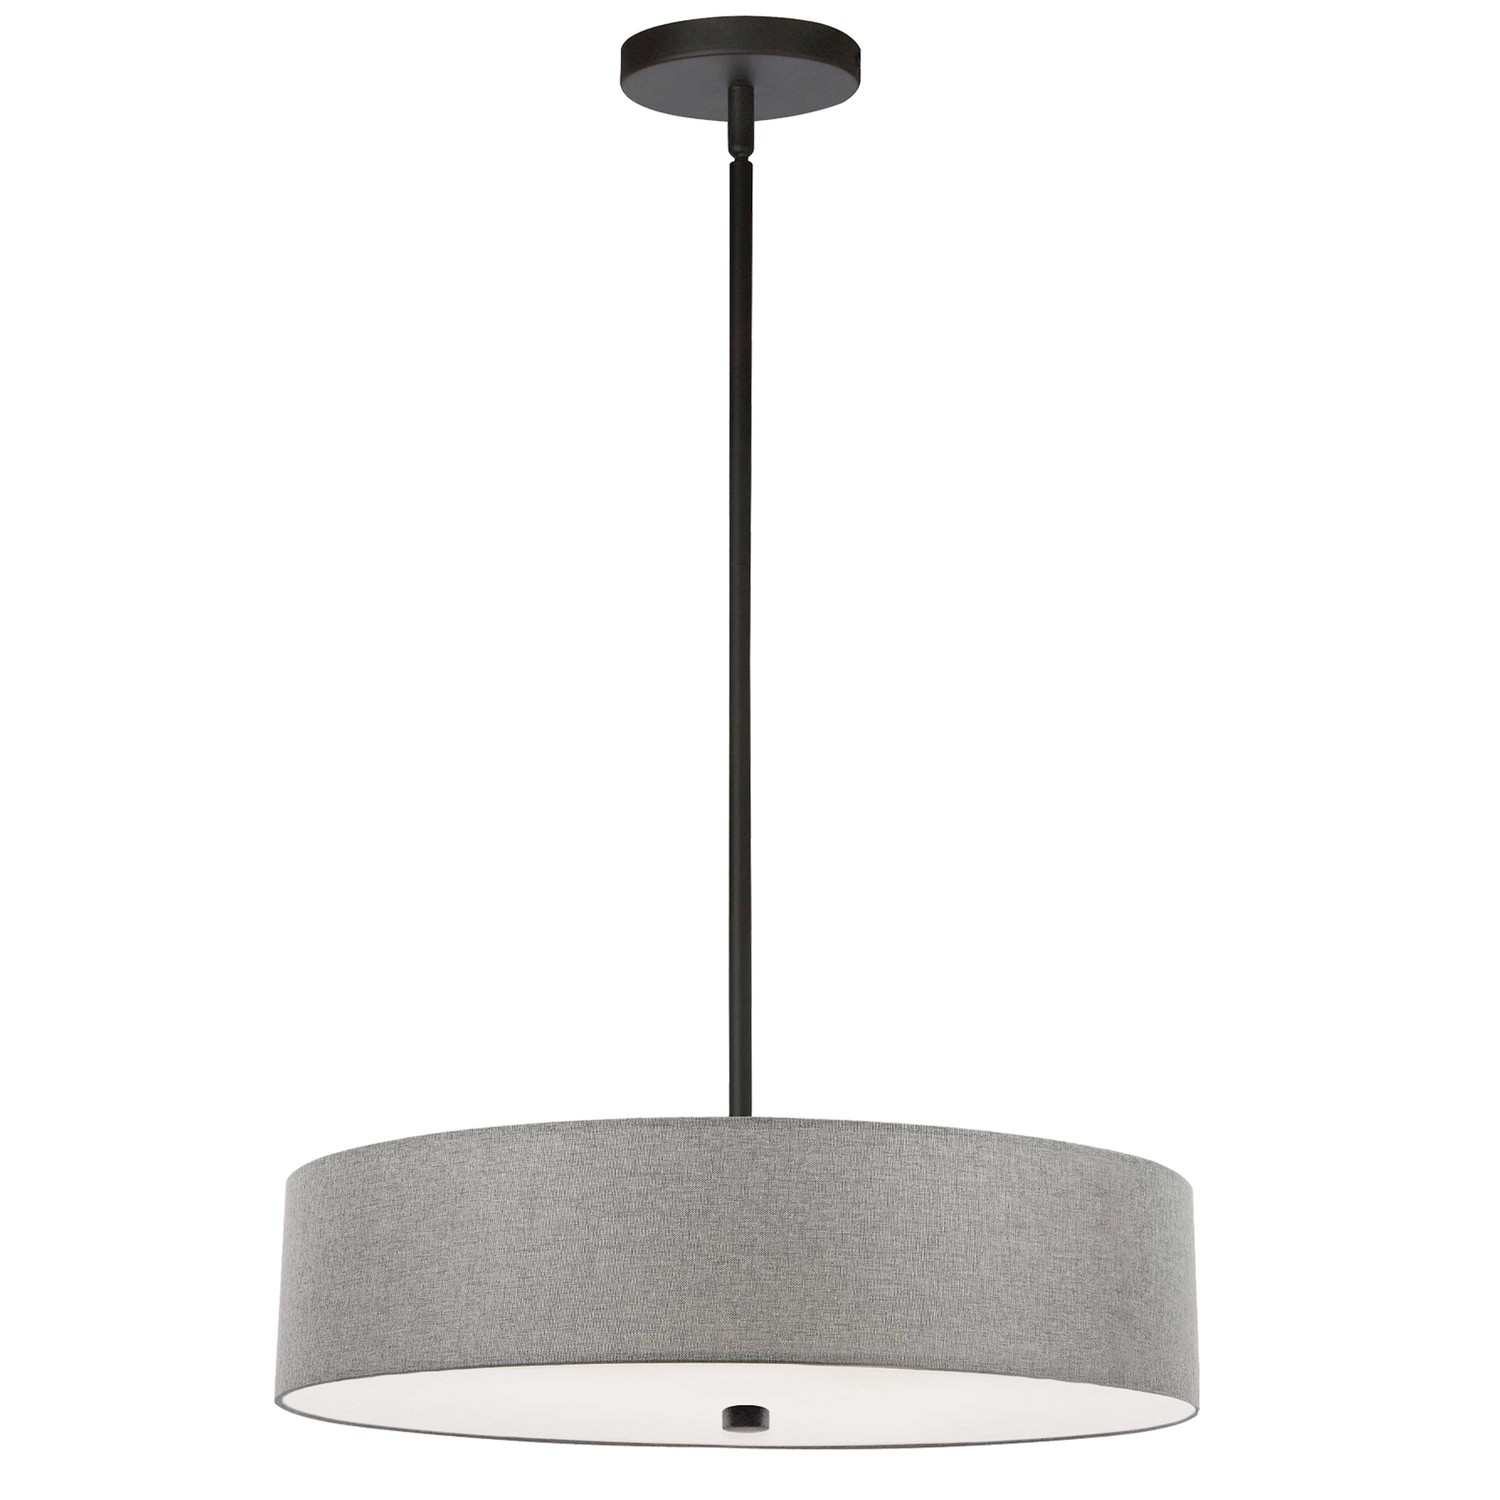 4 Light Incandescent Pendant, Matte Black with Grey Shade     (571-204P-MB-GRY)